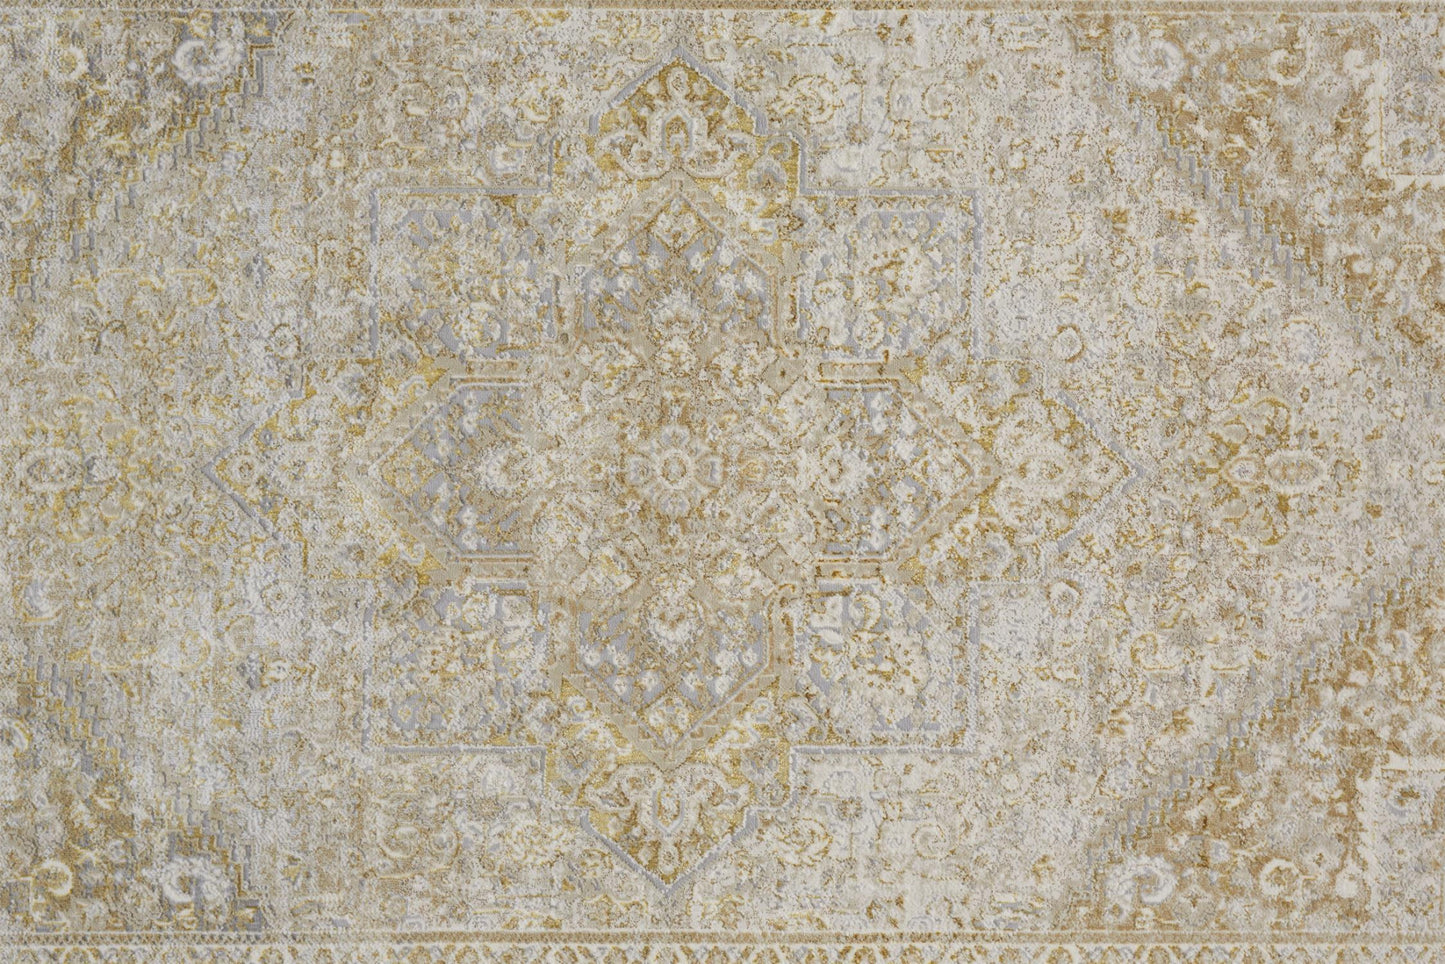 4' X 6' Ivory And Gold Floral Area Rug